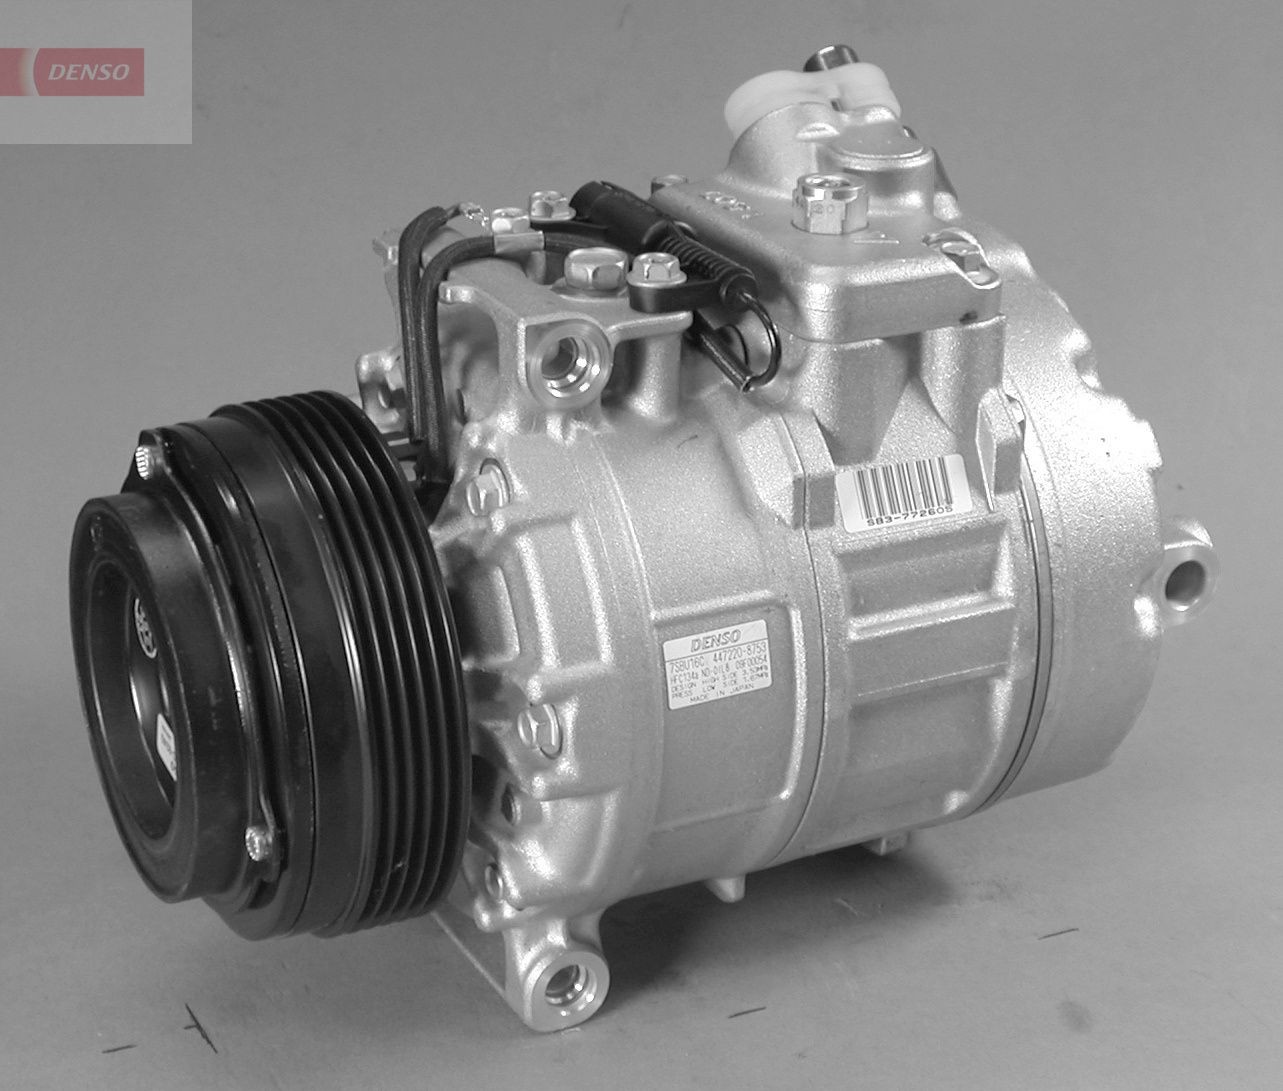 DENSO DCP05018 Air conditioning compressor 7SBU16C, 12V, PAG 46, R 134a, with magnetic clutch